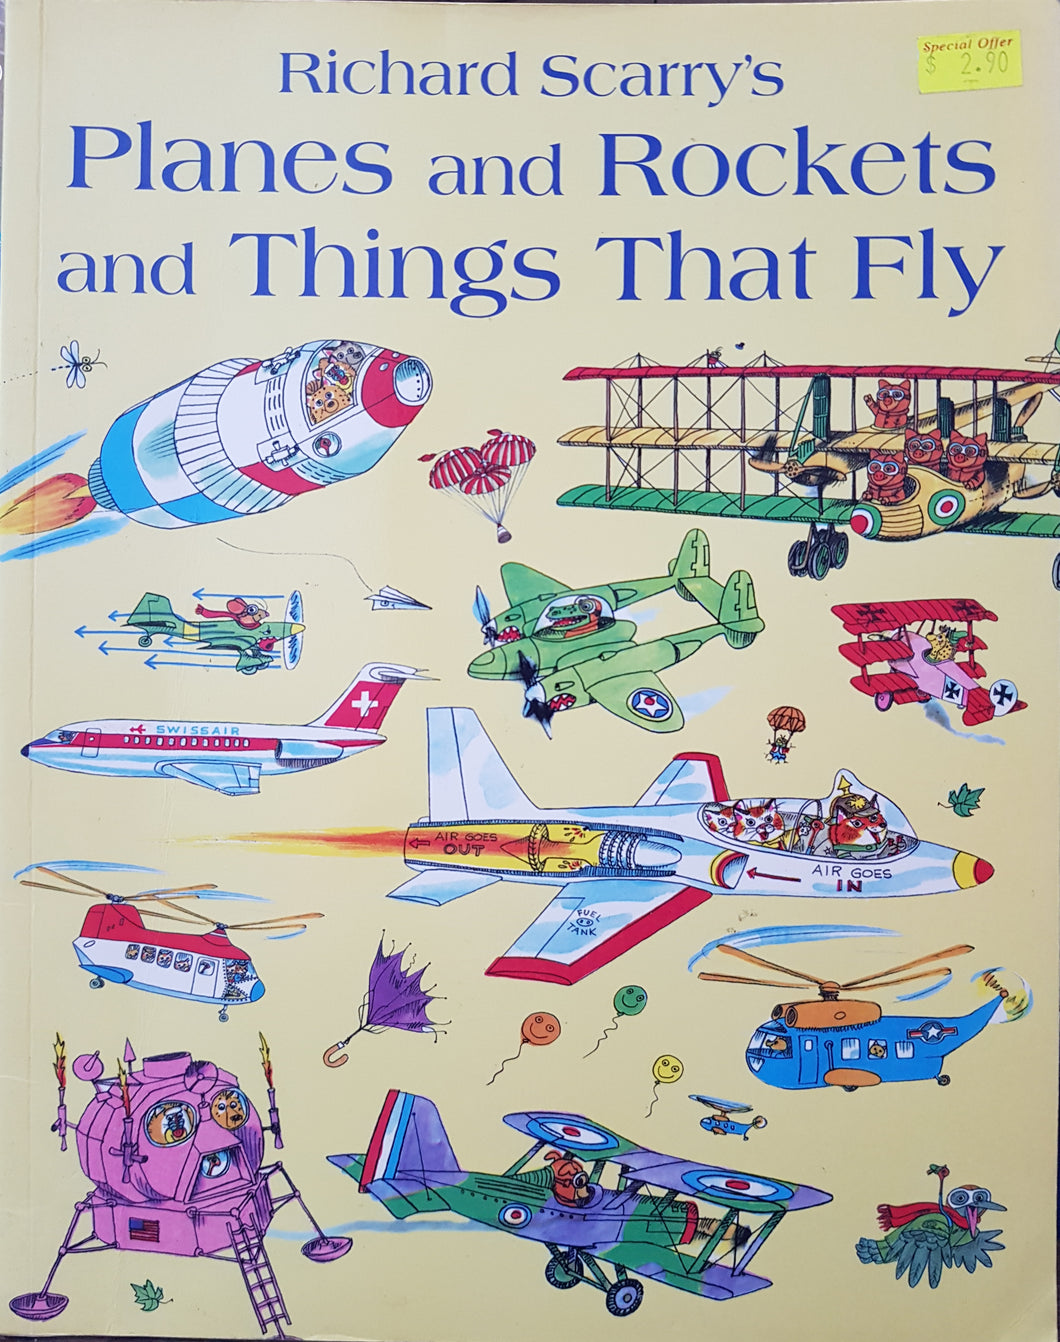 Planes and Rockets and Things That Fly - Richard Scarry